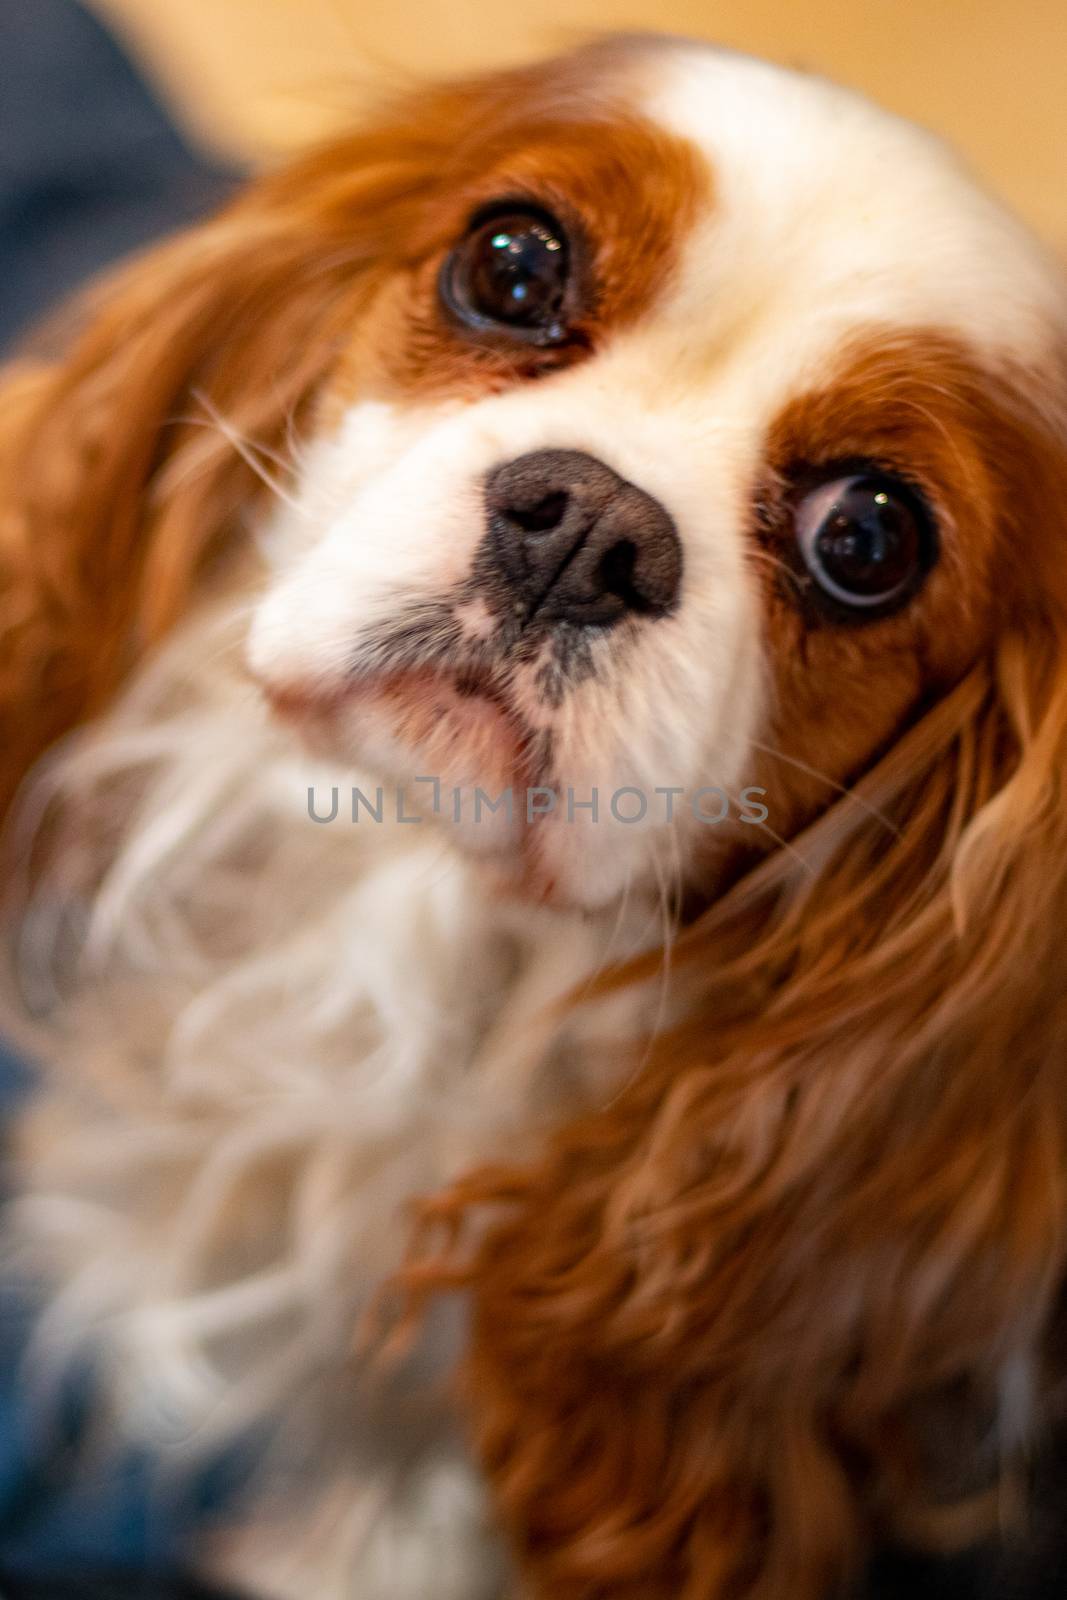 An adult Cavalier King Charles Spaniel with Blenheim coloring looks up inquisitively at the camera from below.